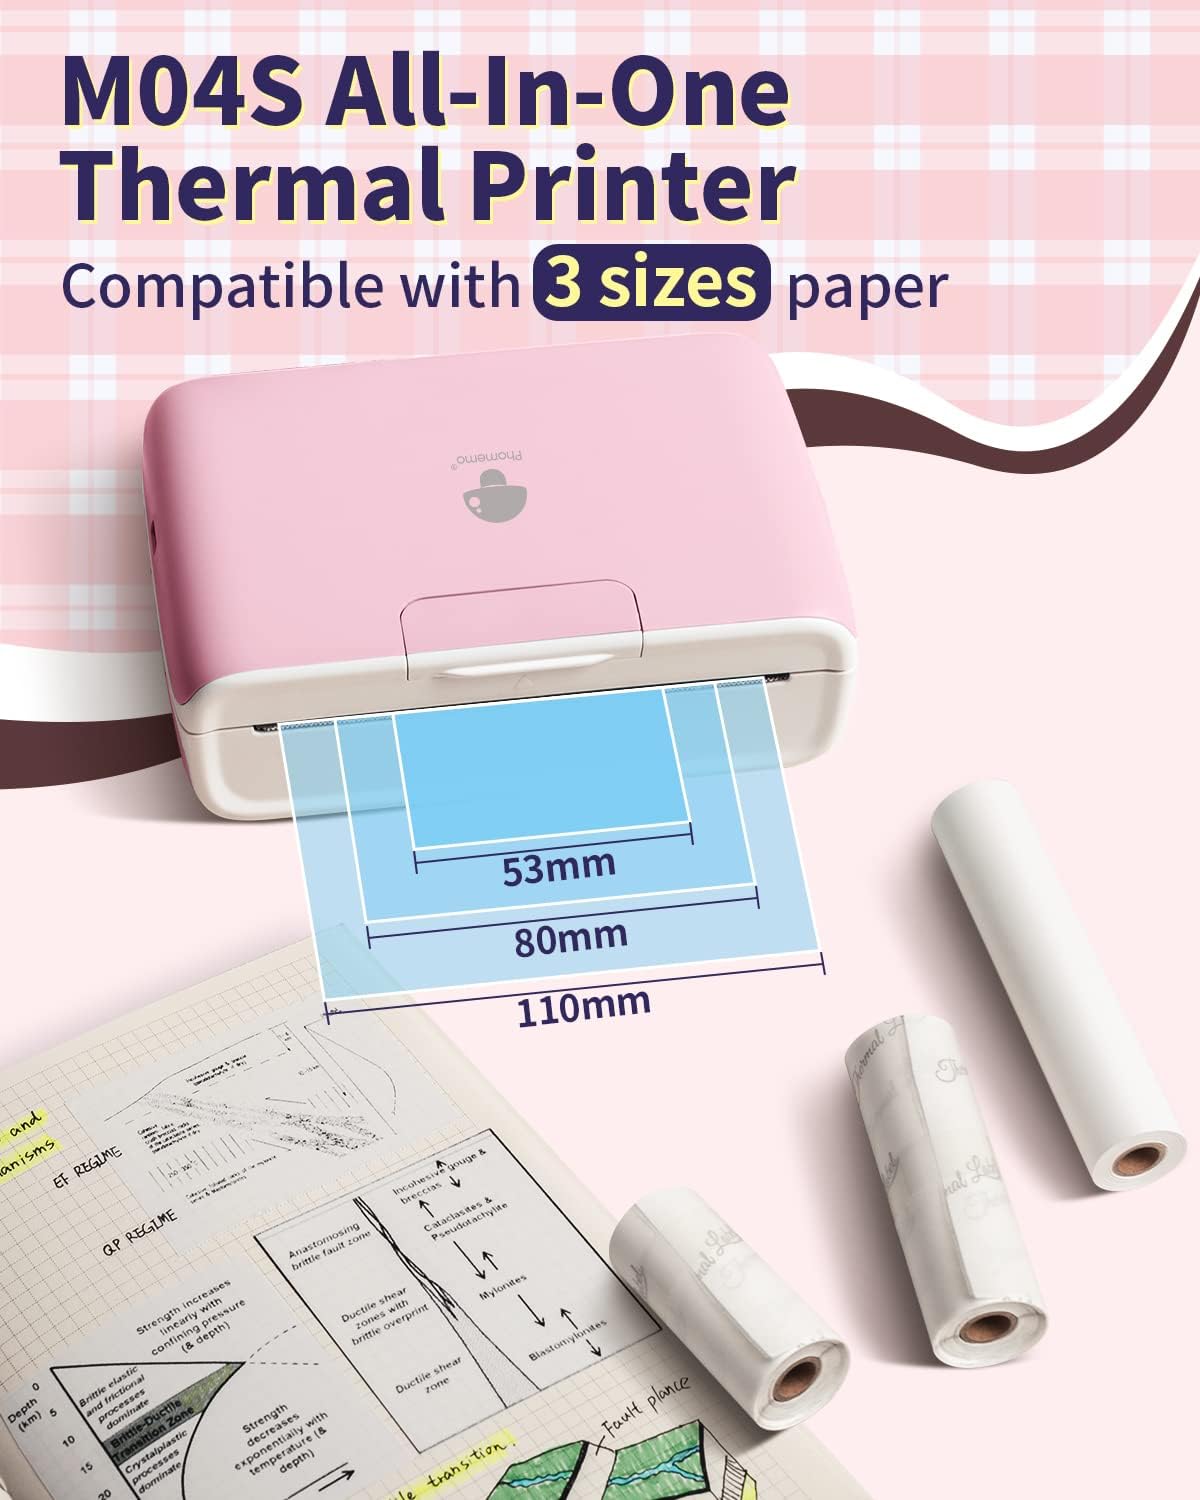 Phomemo 4" Portable Thermal Printer, Support 2/3/4 inch Printing Width - $60